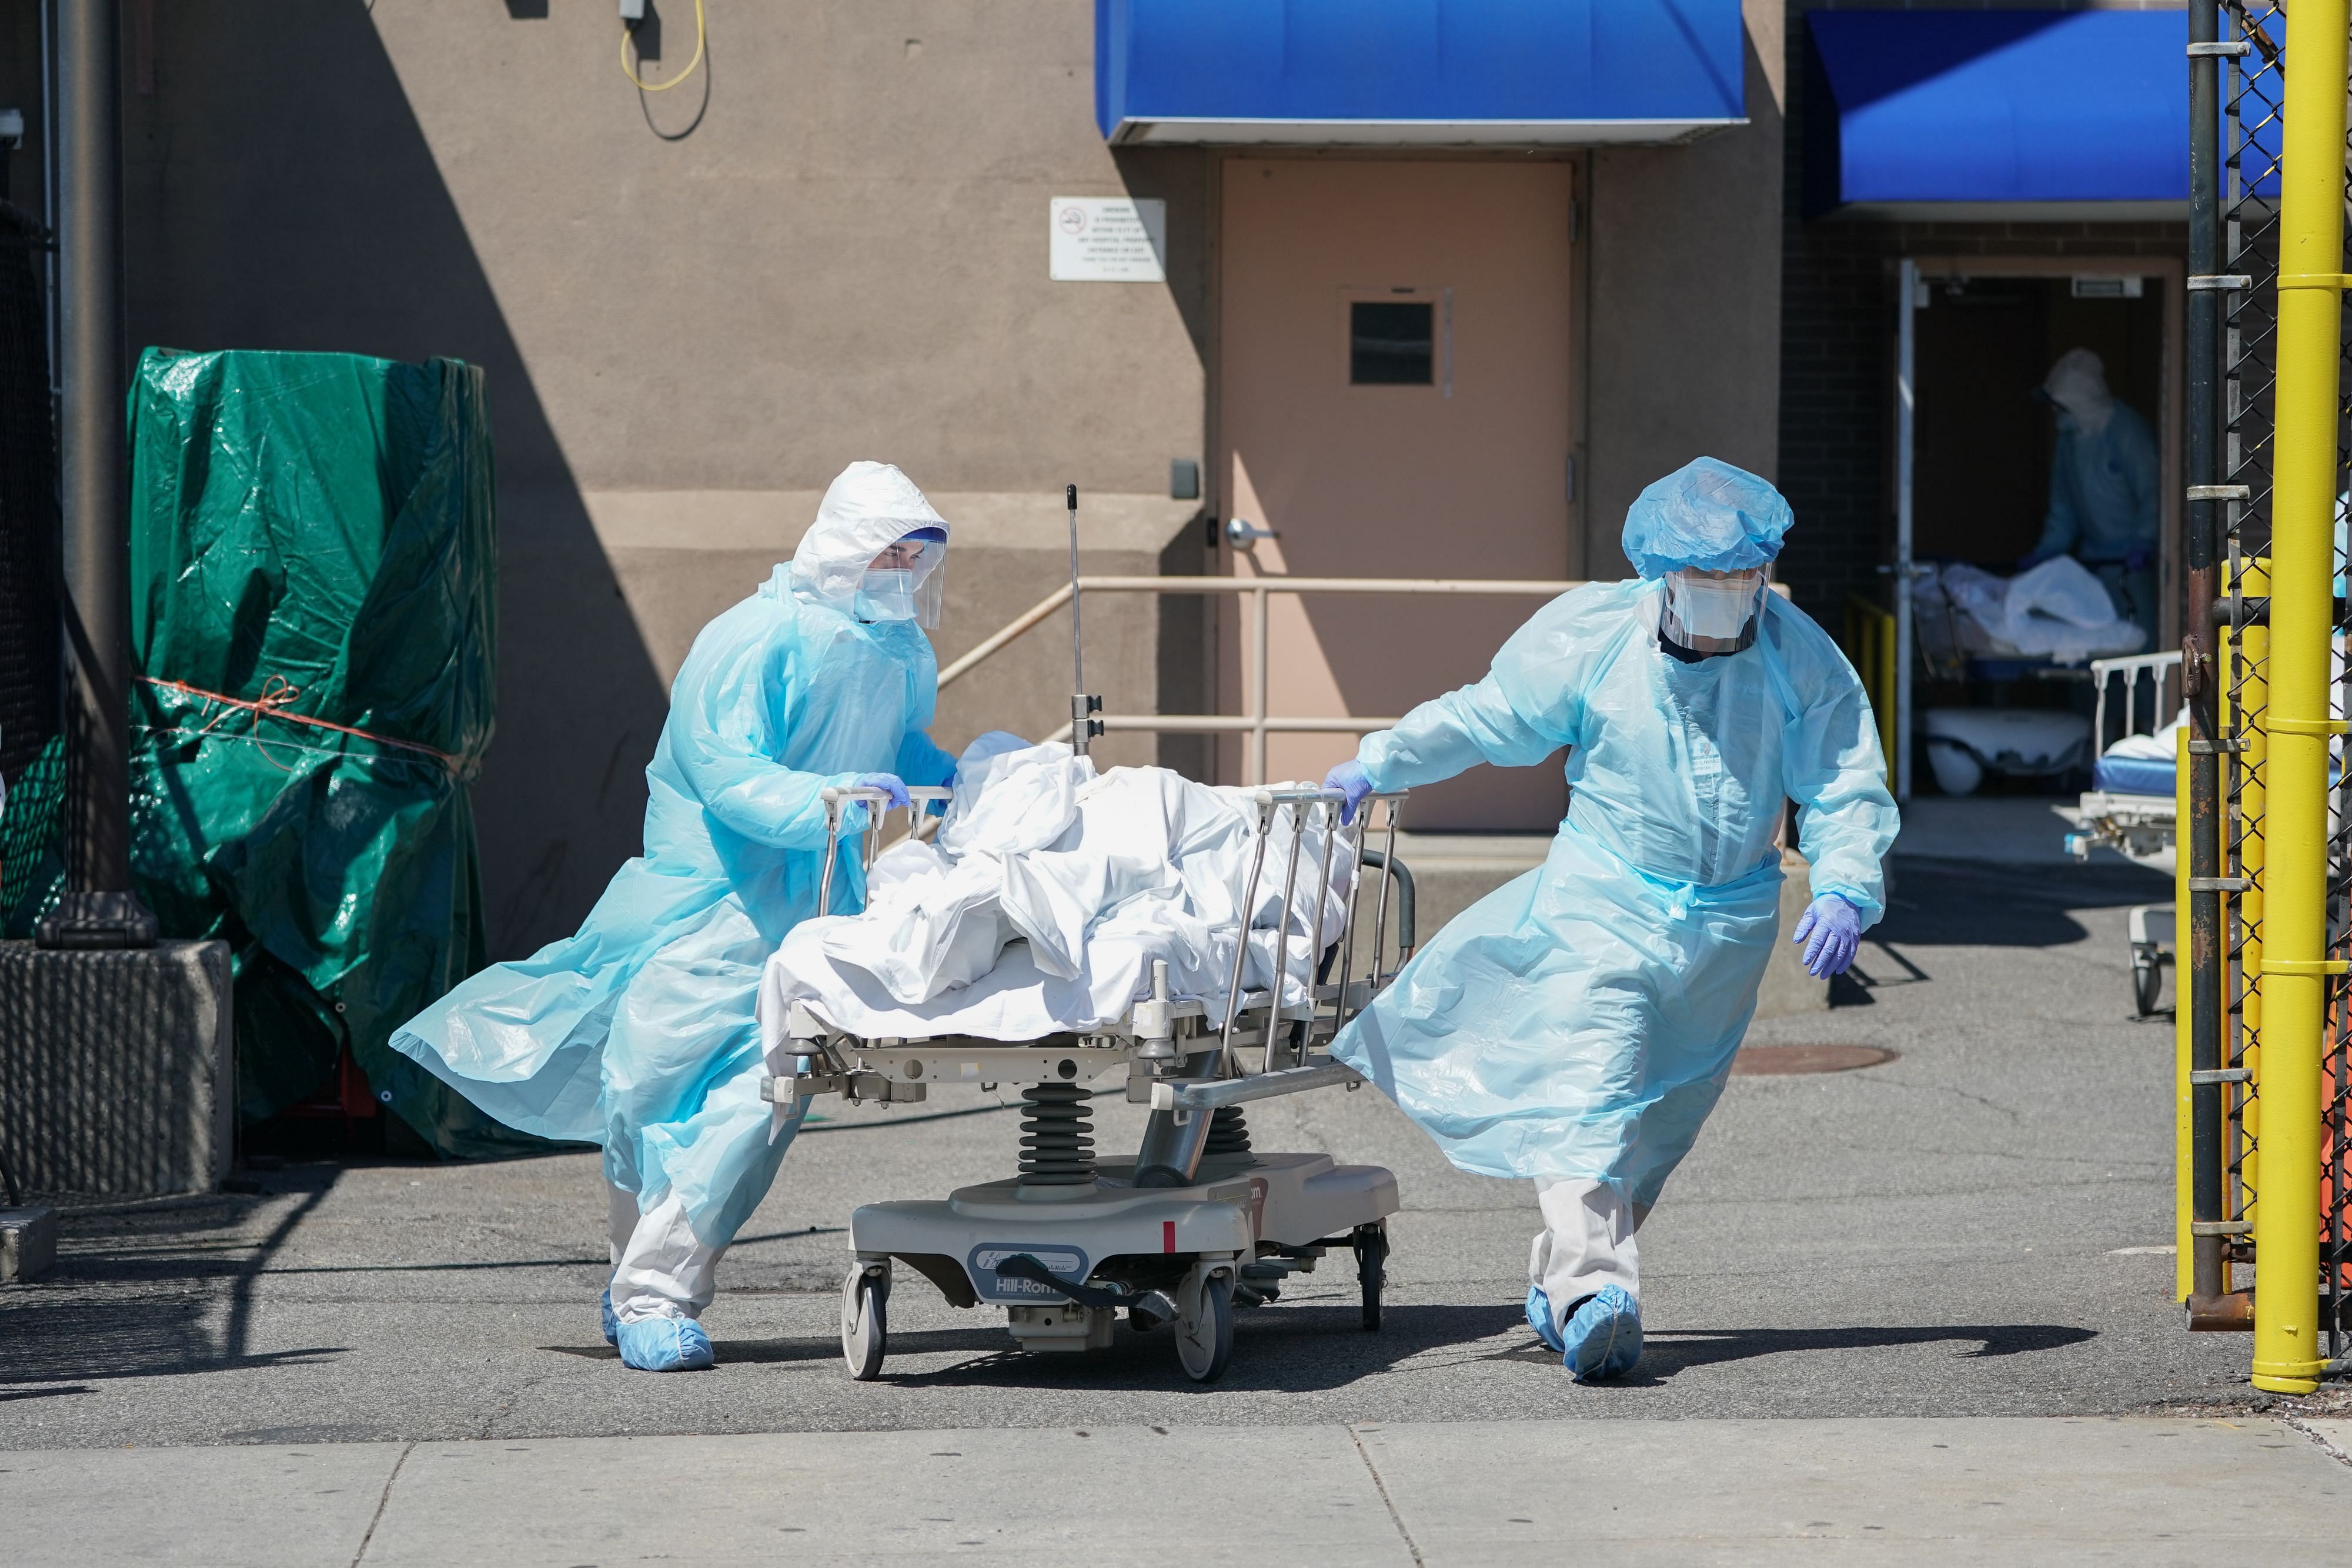 Bodies are moved to a refrigeration truck serving as a temporary morgue at Wyckoff Hospital in the Borough of Brooklyn. Credit: AFP Photo